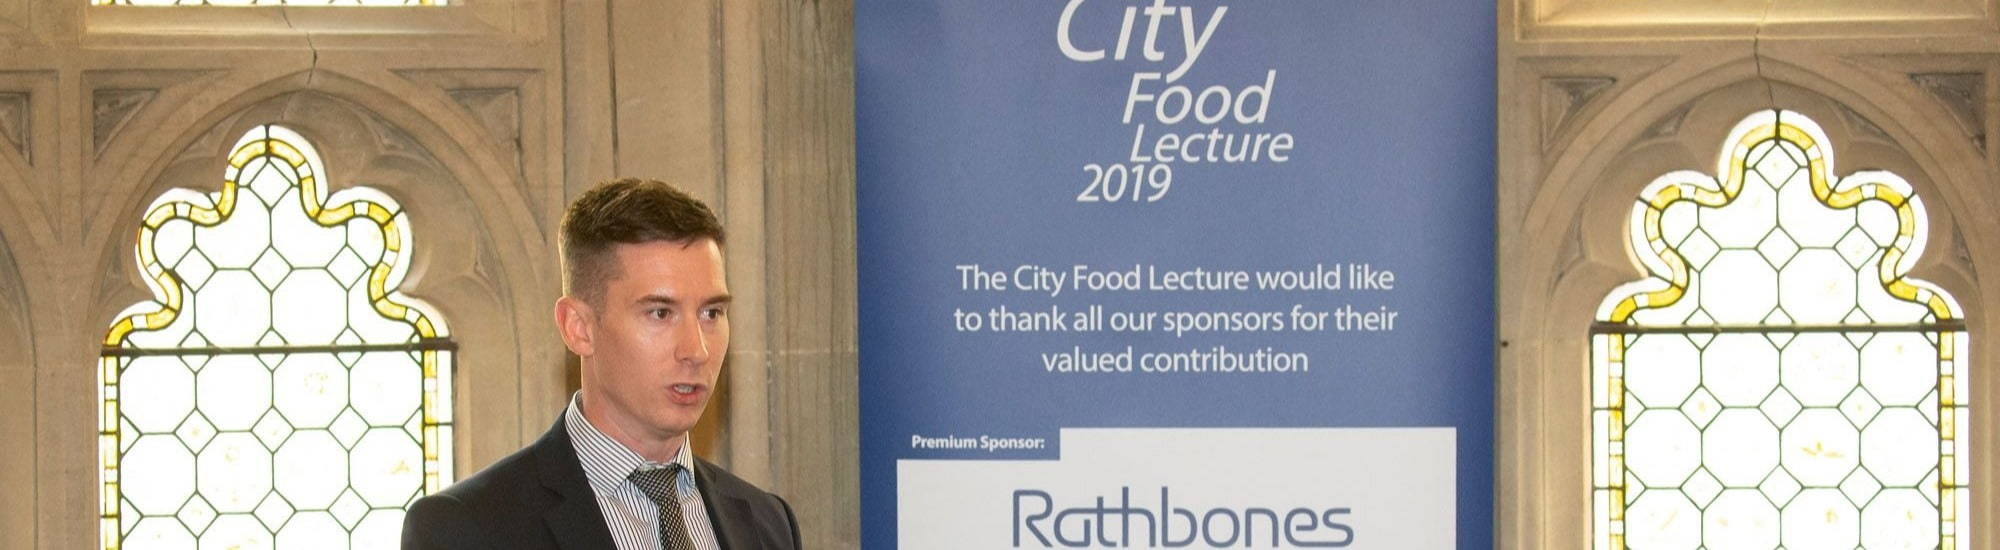 City Food Lecture